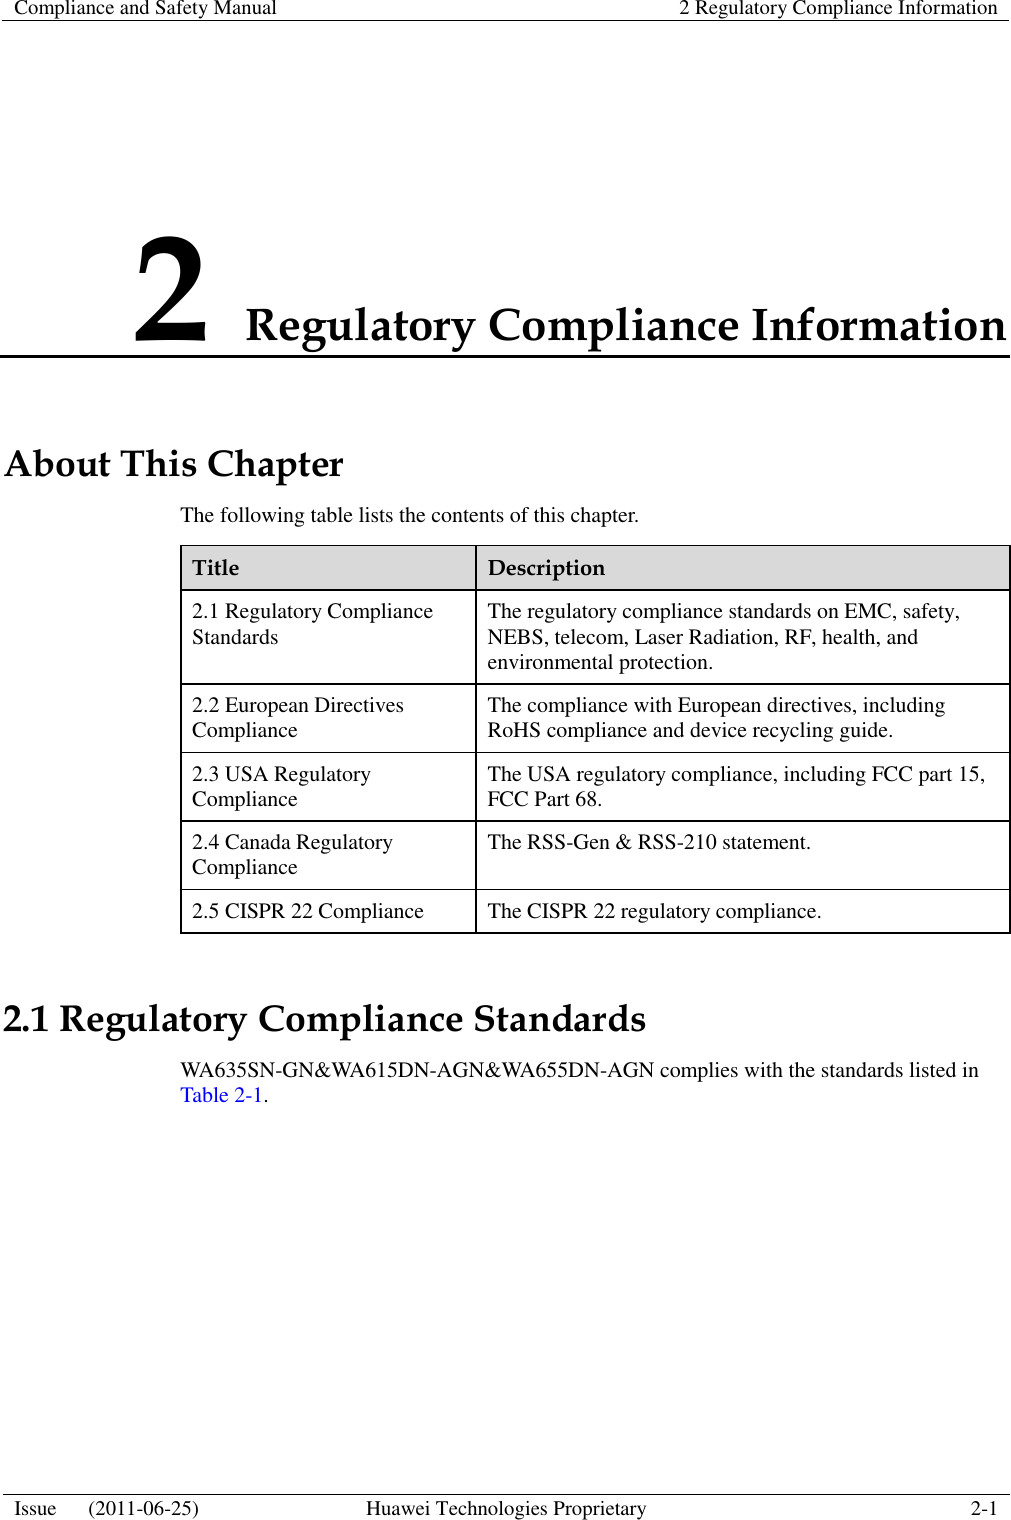 Compliance and Safety Manual 2 Regulatory Compliance Information  Issue      (2011-06-25) Huawei Technologies Proprietary 2-1  2 Regulatory Compliance Information About This Chapter The following table lists the contents of this chapter. Title Description 2.1 Regulatory Compliance Standards The regulatory compliance standards on EMC, safety, NEBS, telecom, Laser Radiation, RF, health, and environmental protection. 2.2 European Directives Compliance The compliance with European directives, including RoHS compliance and device recycling guide. 2.3 USA Regulatory Compliance   The USA regulatory compliance, including FCC part 15, FCC Part 68. 2.4 Canada Regulatory Compliance The RSS-Gen &amp; RSS-210 statement. 2.5 CISPR 22 Compliance The CISPR 22 regulatory compliance. 2.1 Regulatory Compliance Standards WA635SN-GN&amp;WA615DN-AGN&amp;WA655DN-AGN complies with the standards listed in Table 2-1. 